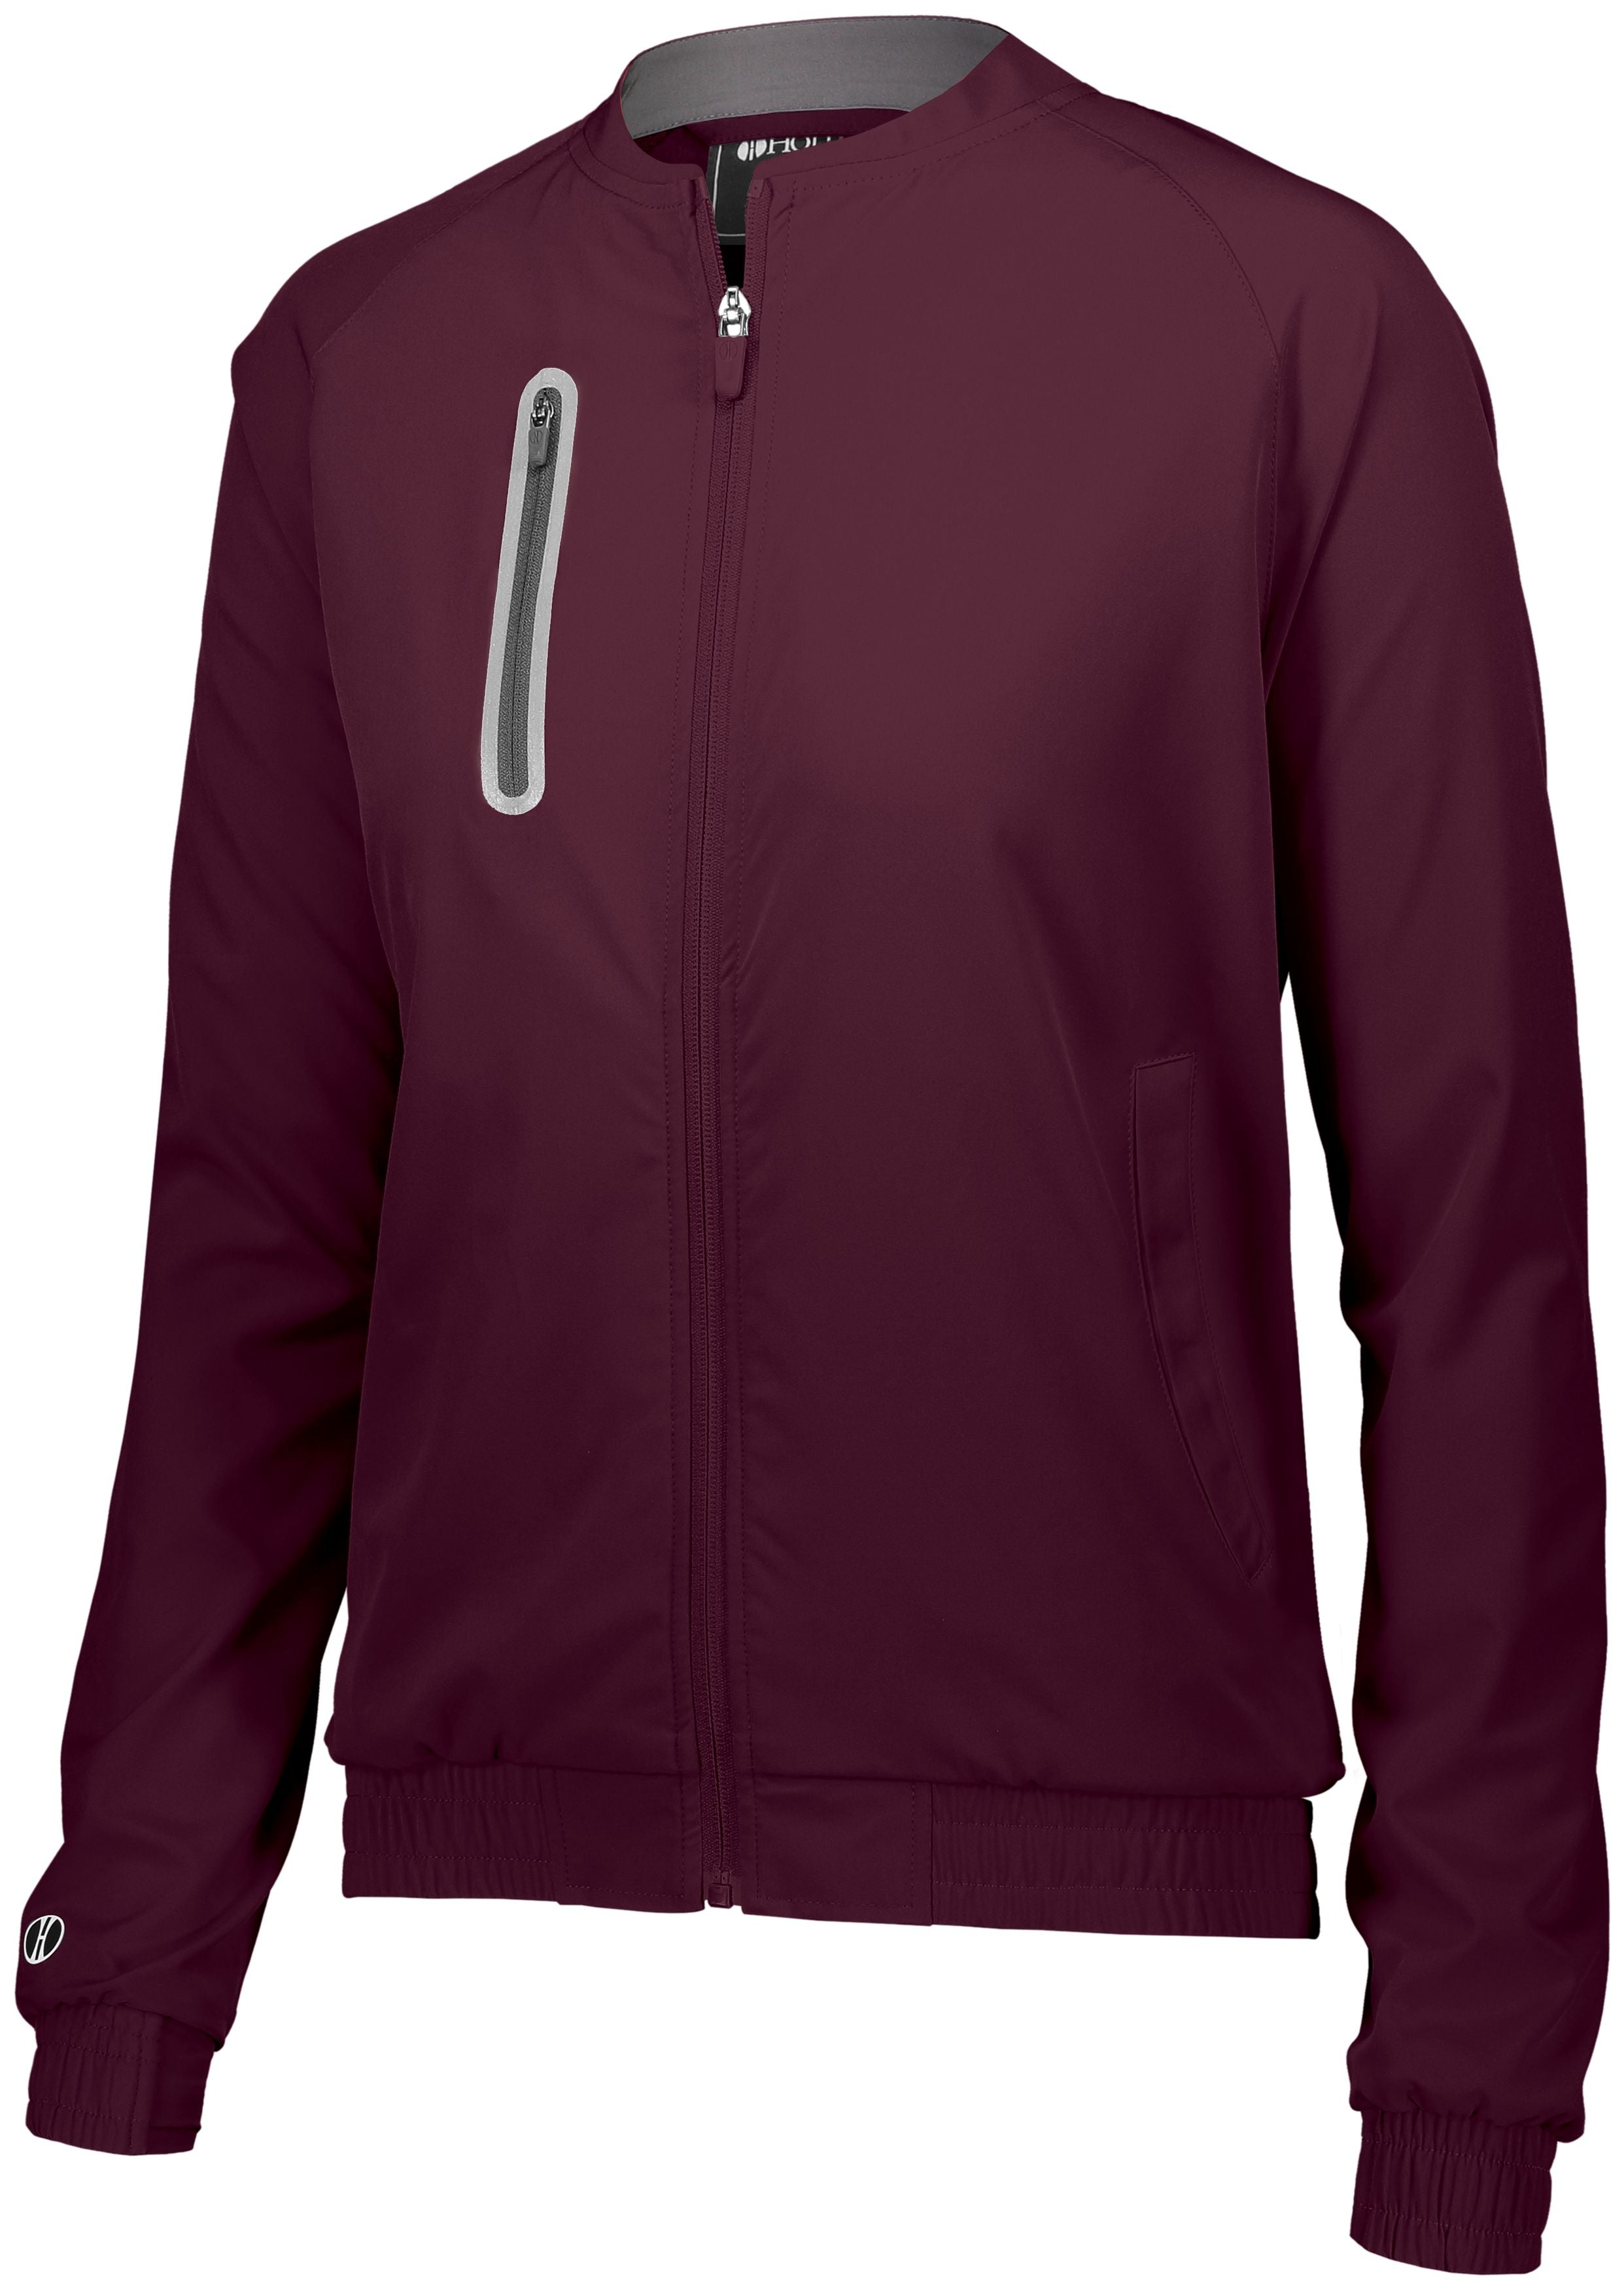 Holloway Ladies Weld Jacket in Maroon  -Part of the Ladies, Ladies-Jacket, Holloway, Outerwear, Weld-Collection product lines at KanaleyCreations.com